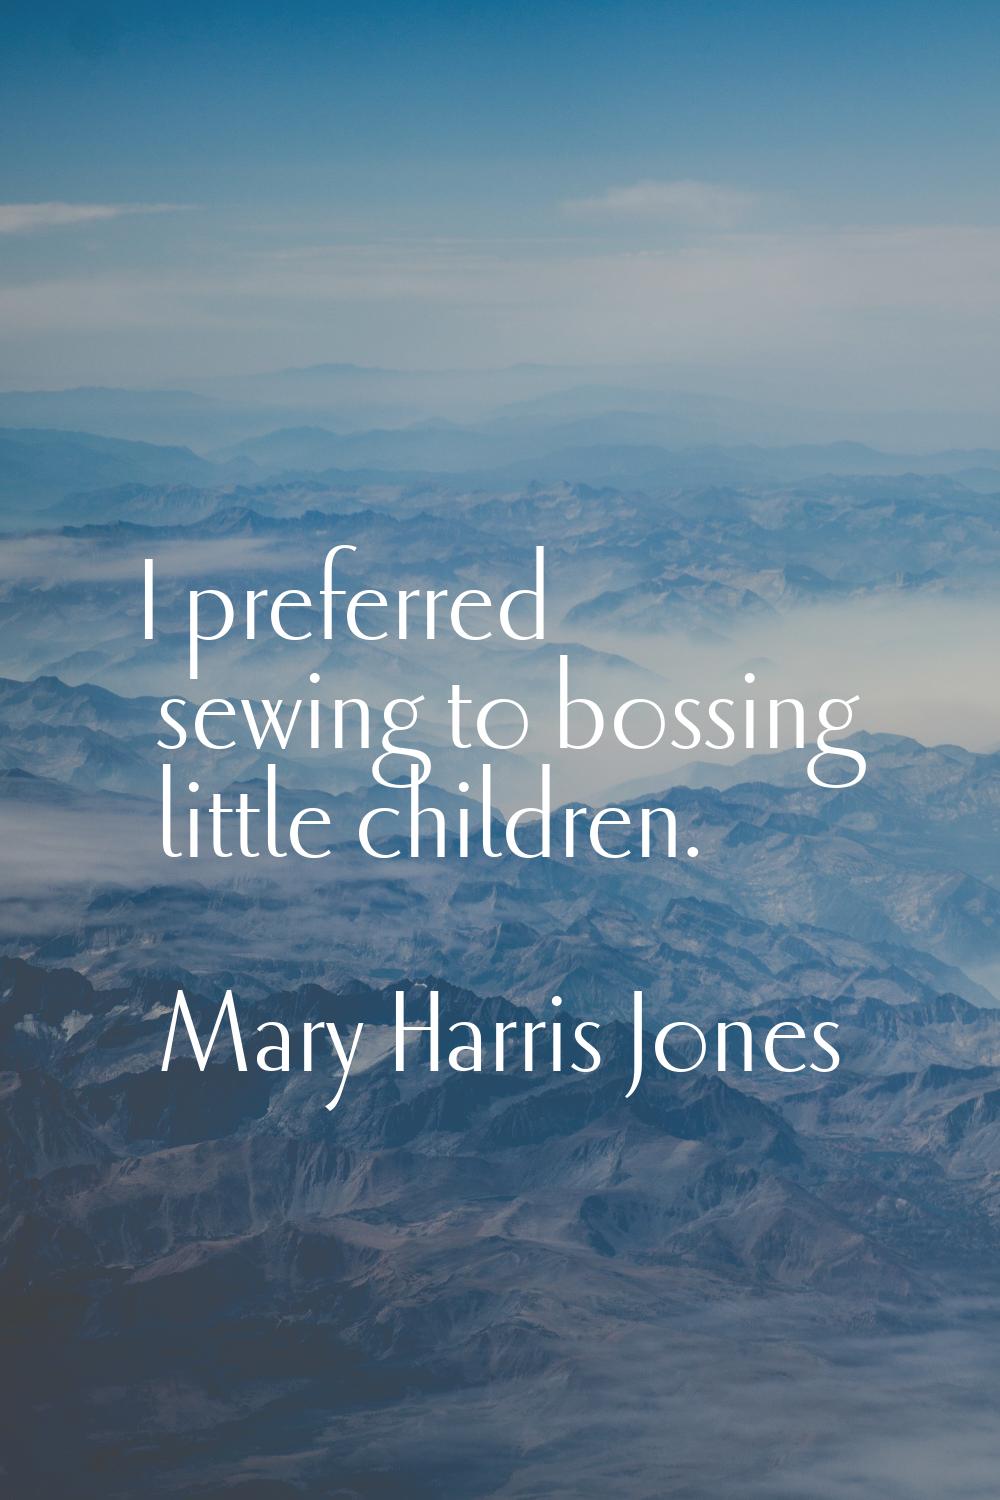 I preferred sewing to bossing little children.